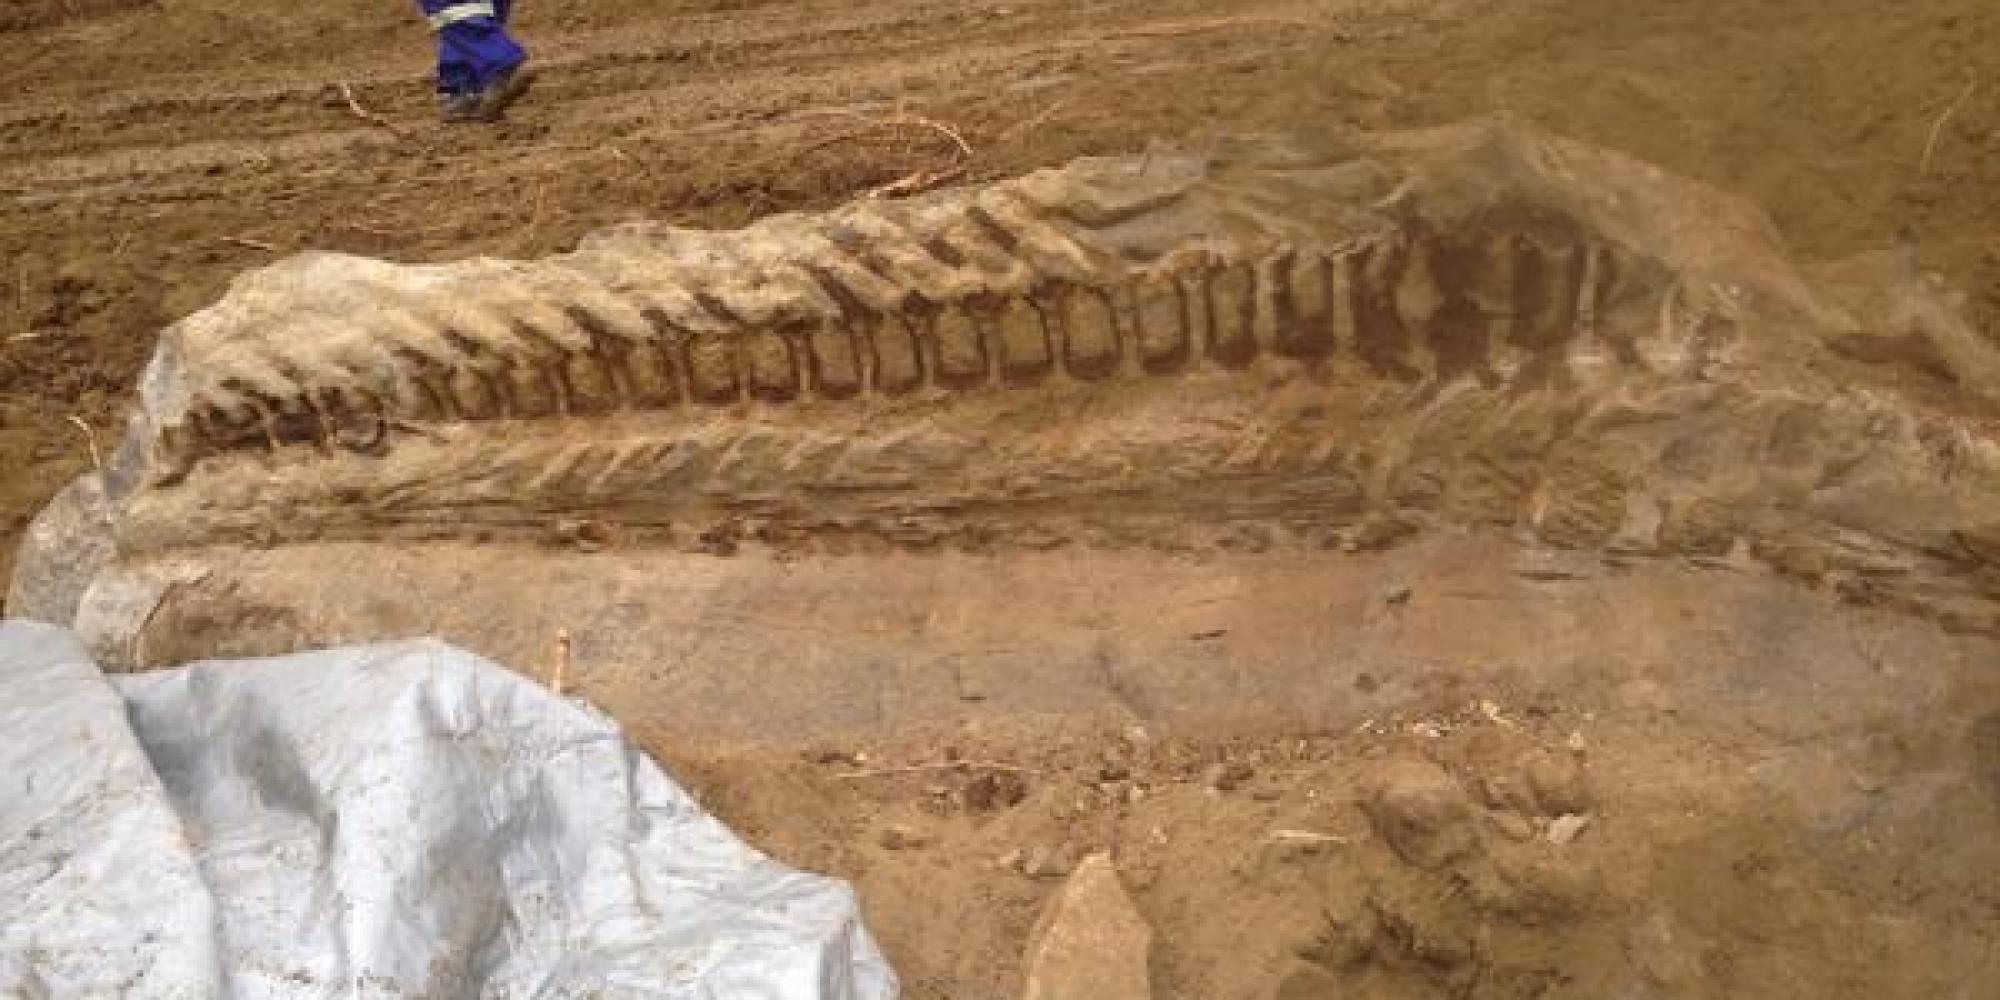 Massive Dinosaur Fossil Unearthed By Alberta Pipeline Crew (PHOTO)